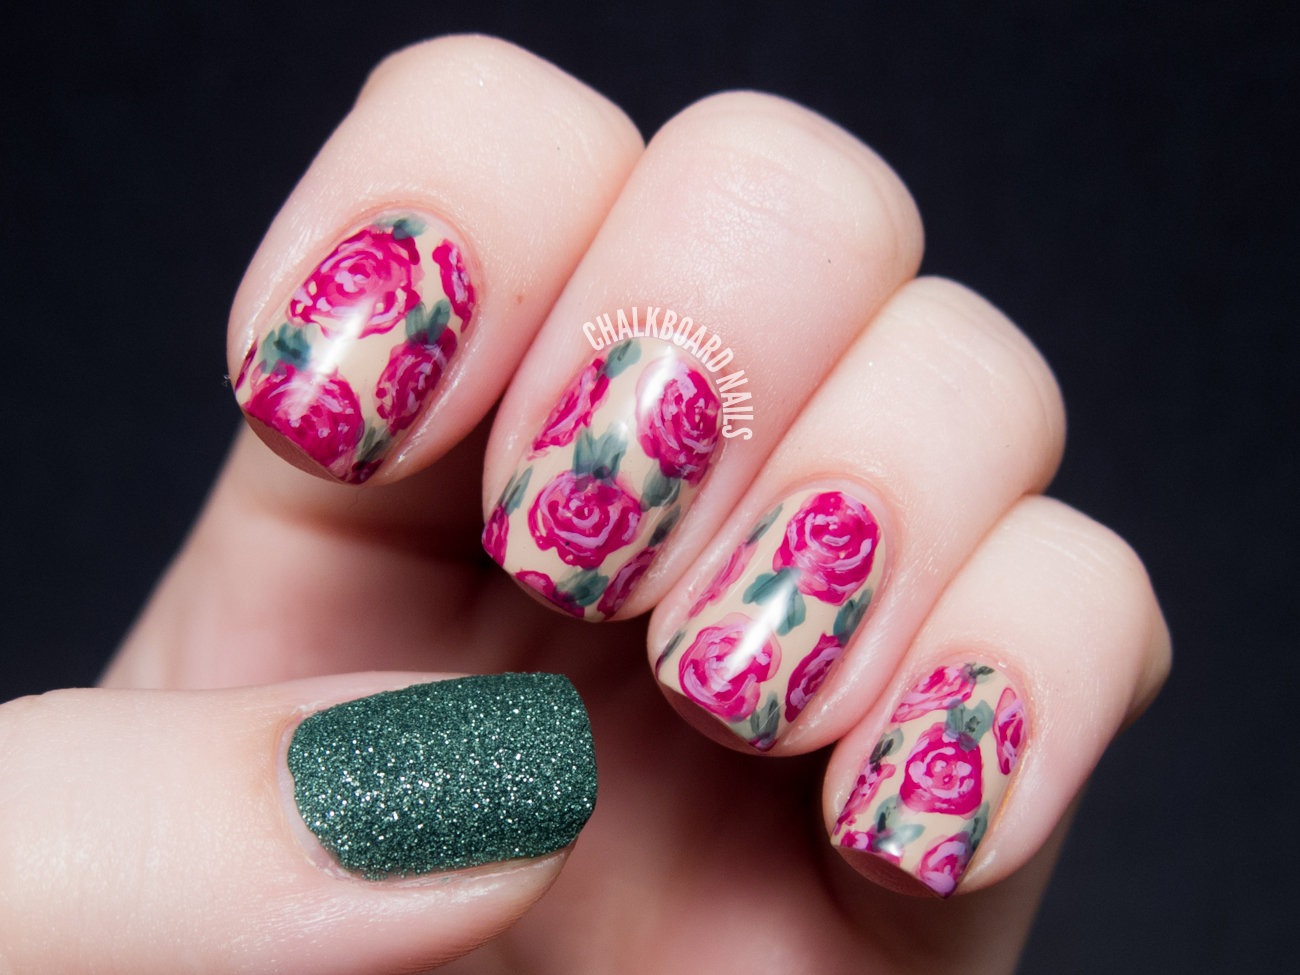 10. Floral Rose Nail Art - wide 3